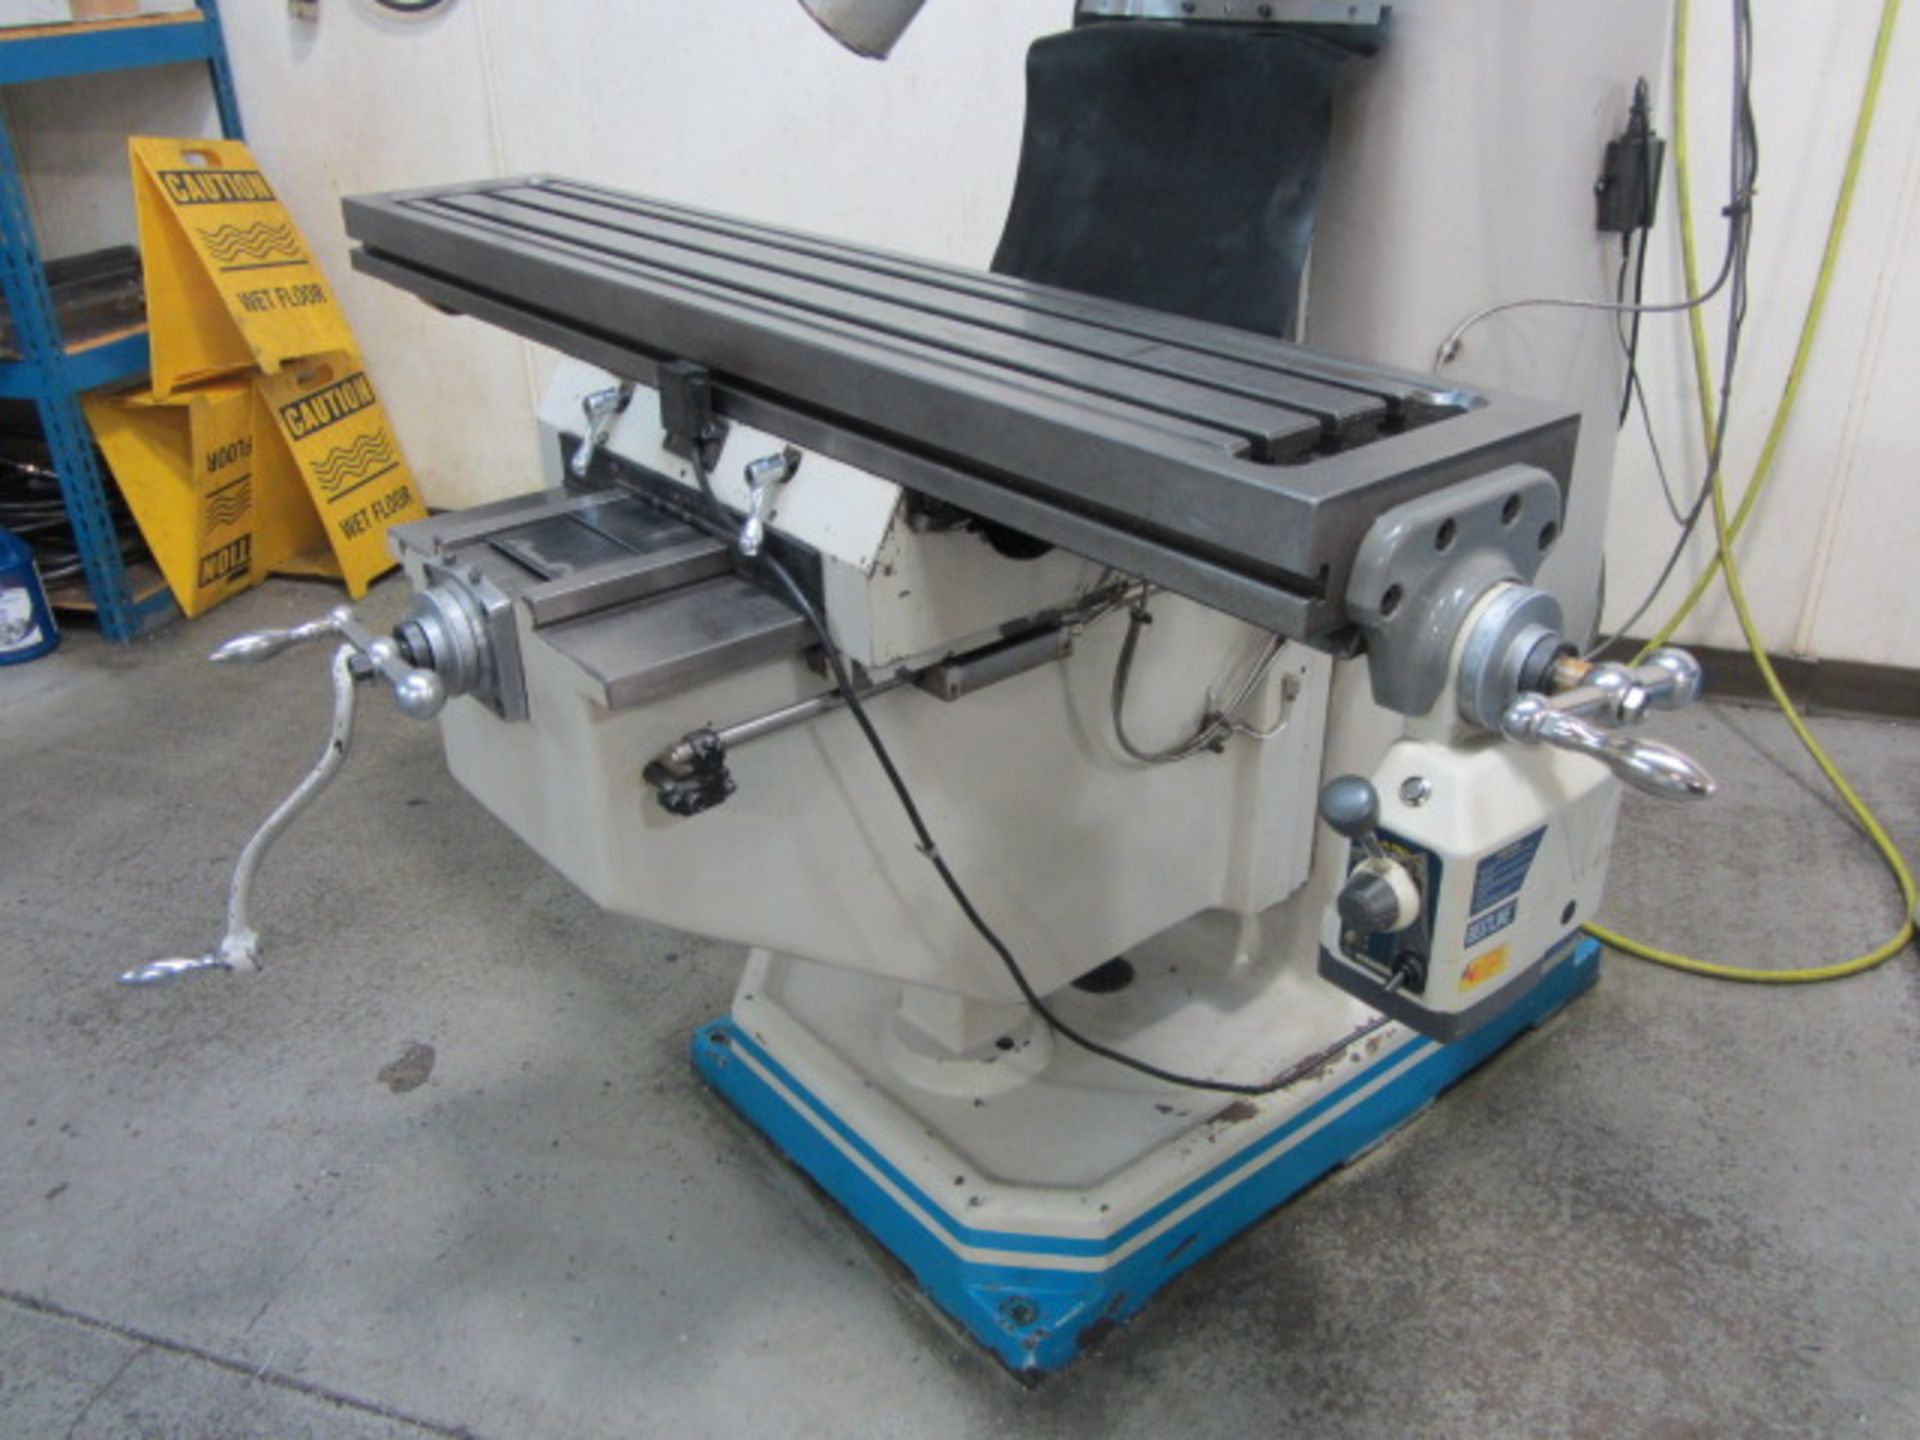 Acra Model AM-3V Variable Speed Vertical Milling Machine with 10'' x 54'' Power Feed Table, R-8 - Image 8 of 9